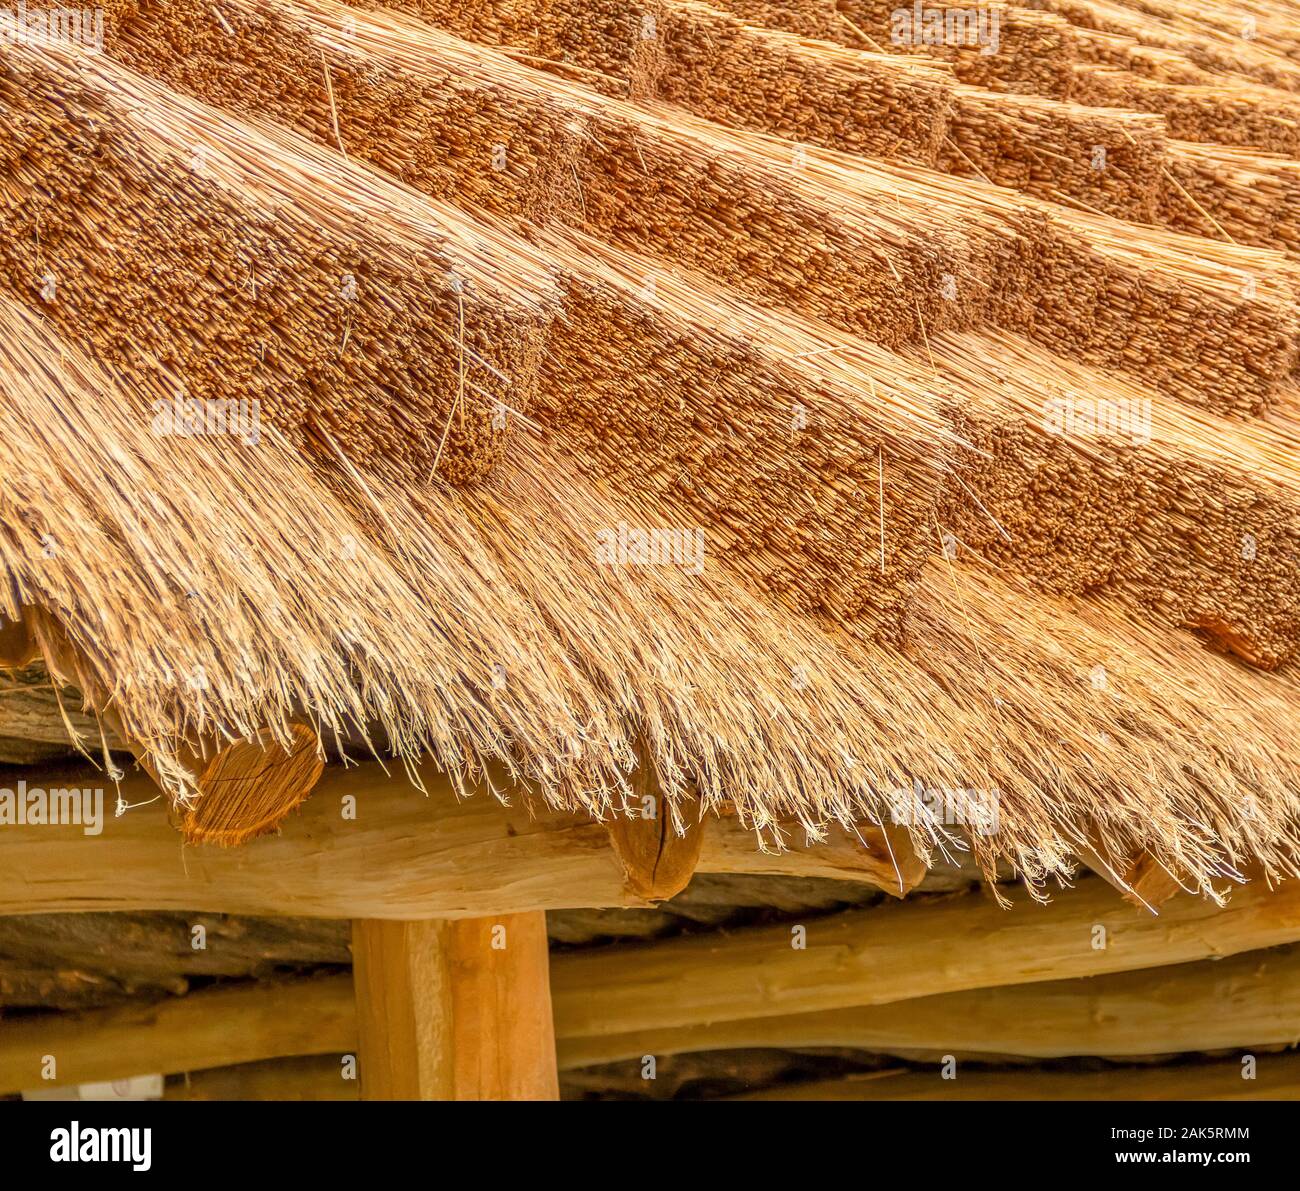 closeup shot showing a wooden construction with thatched roof Stock Photo